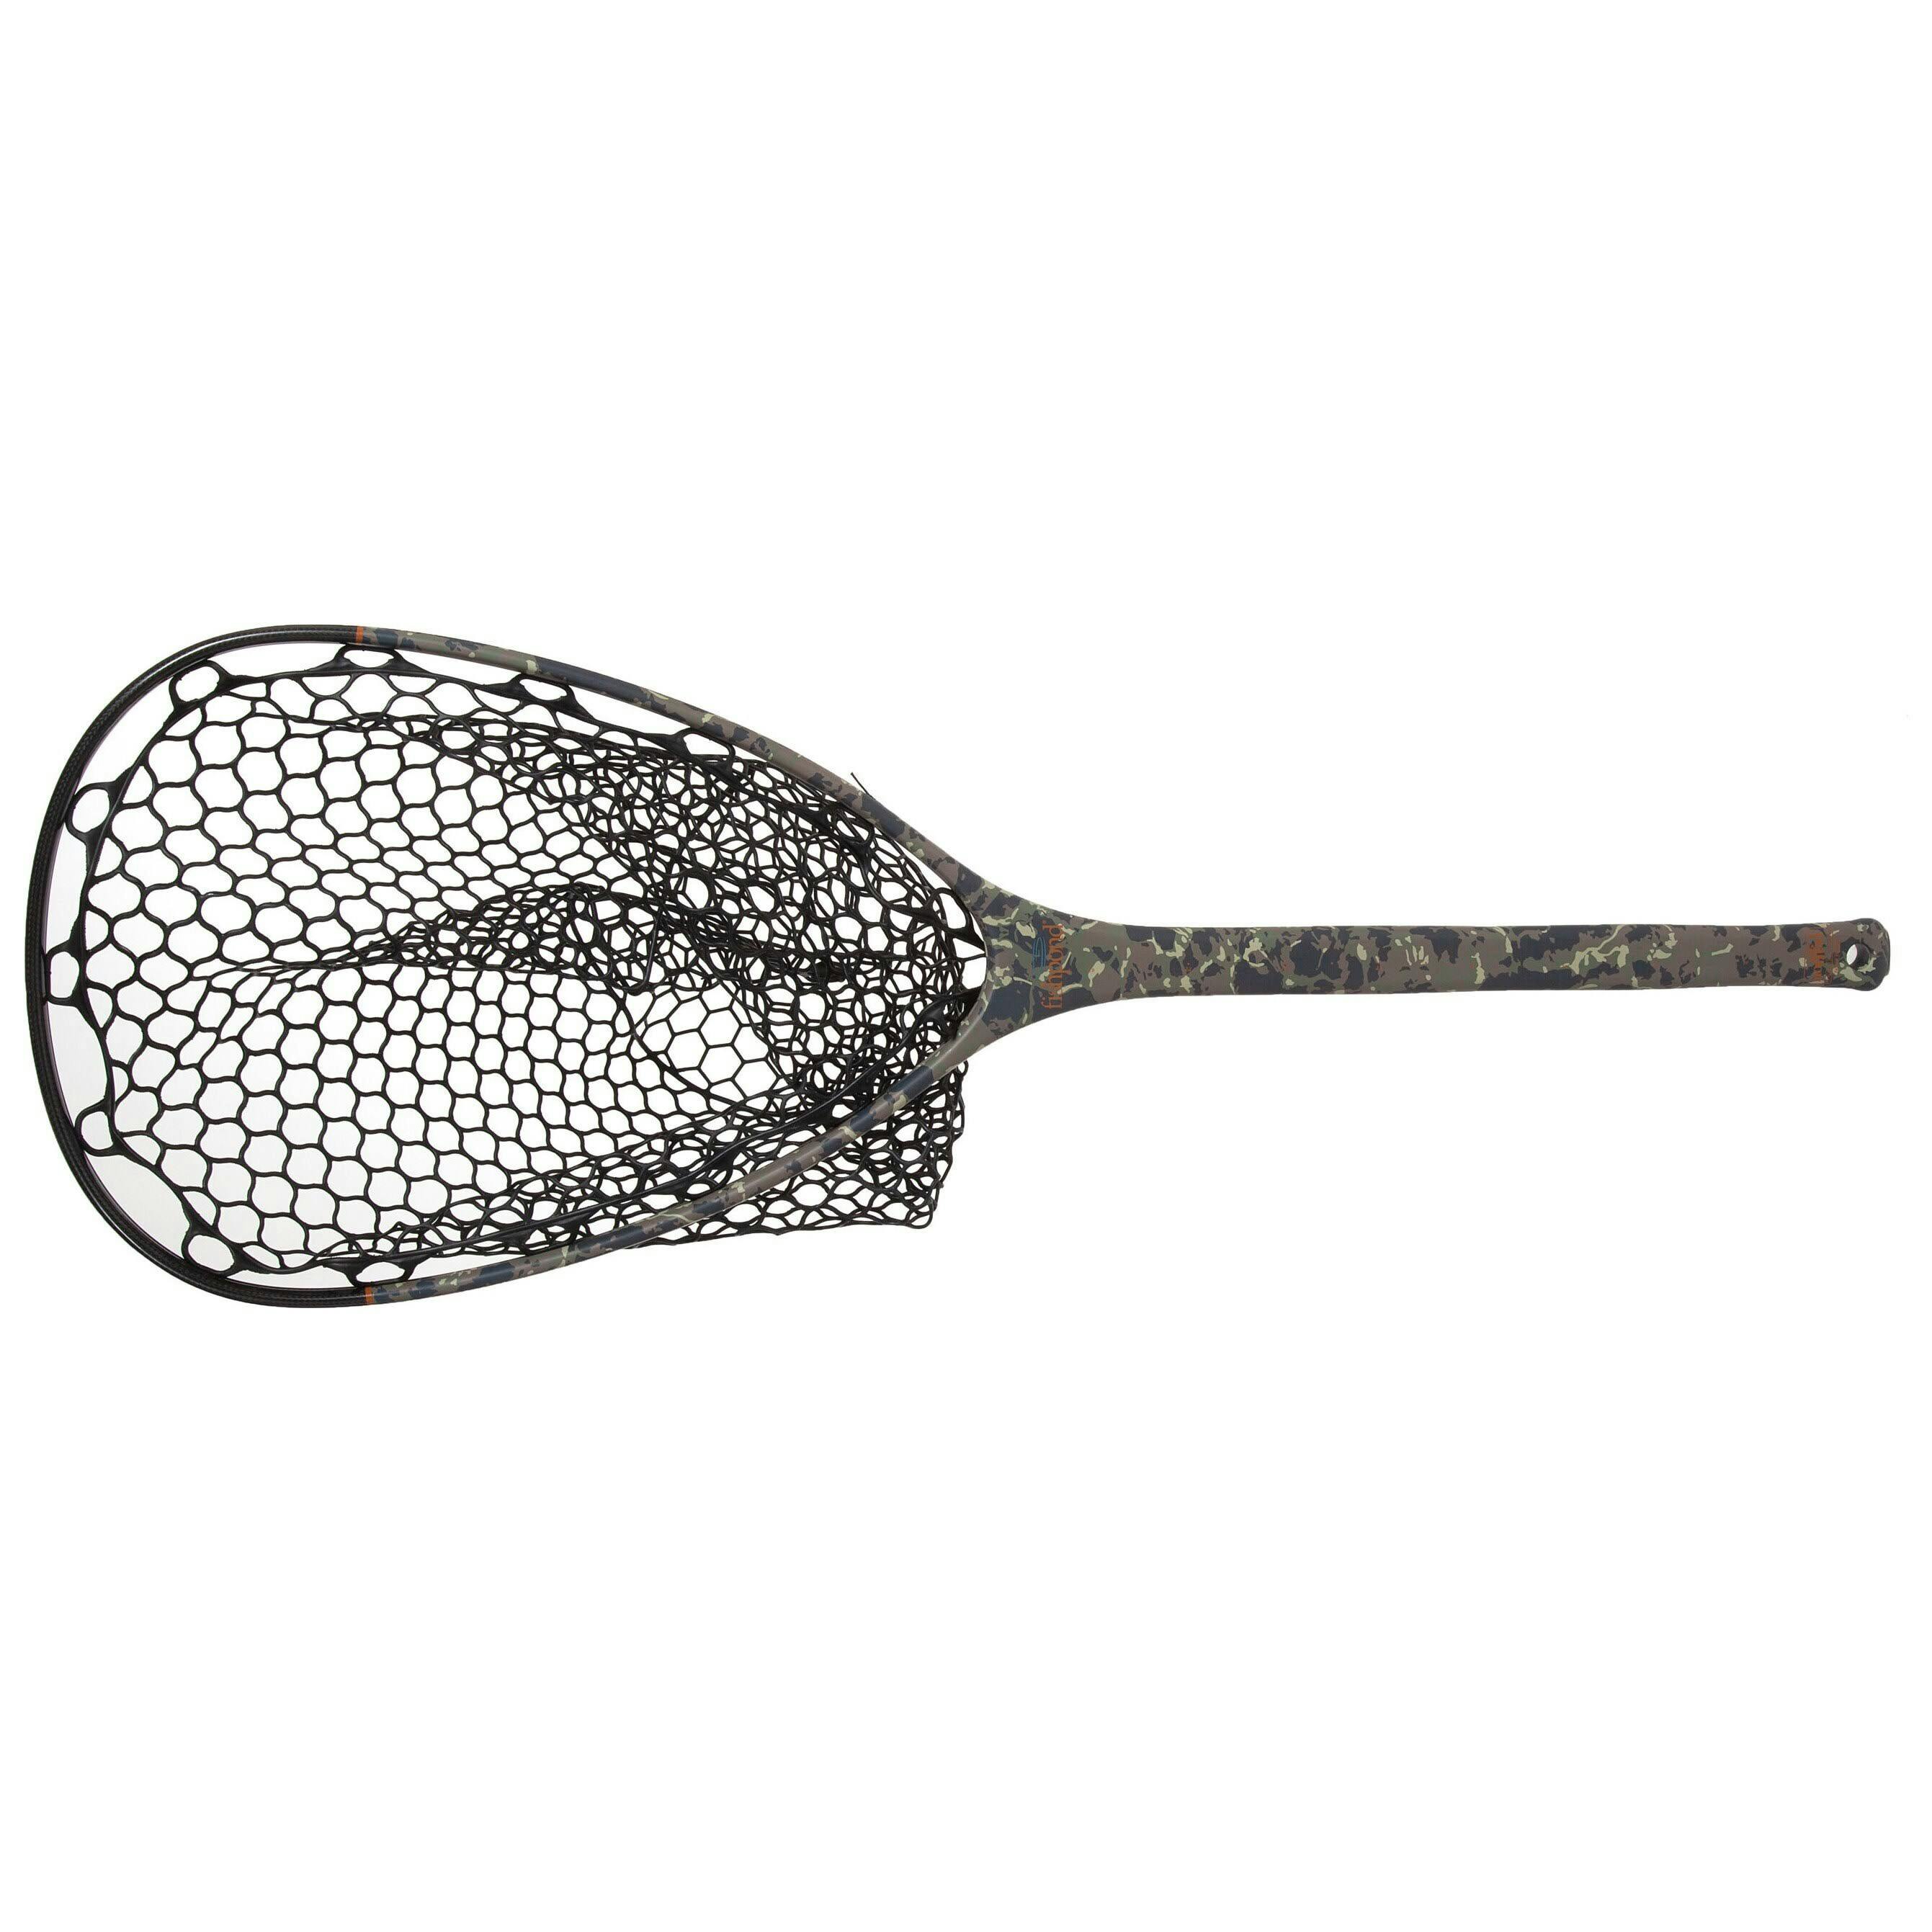 Fishpond Nomad Mid Length Net - Riverbed Camo